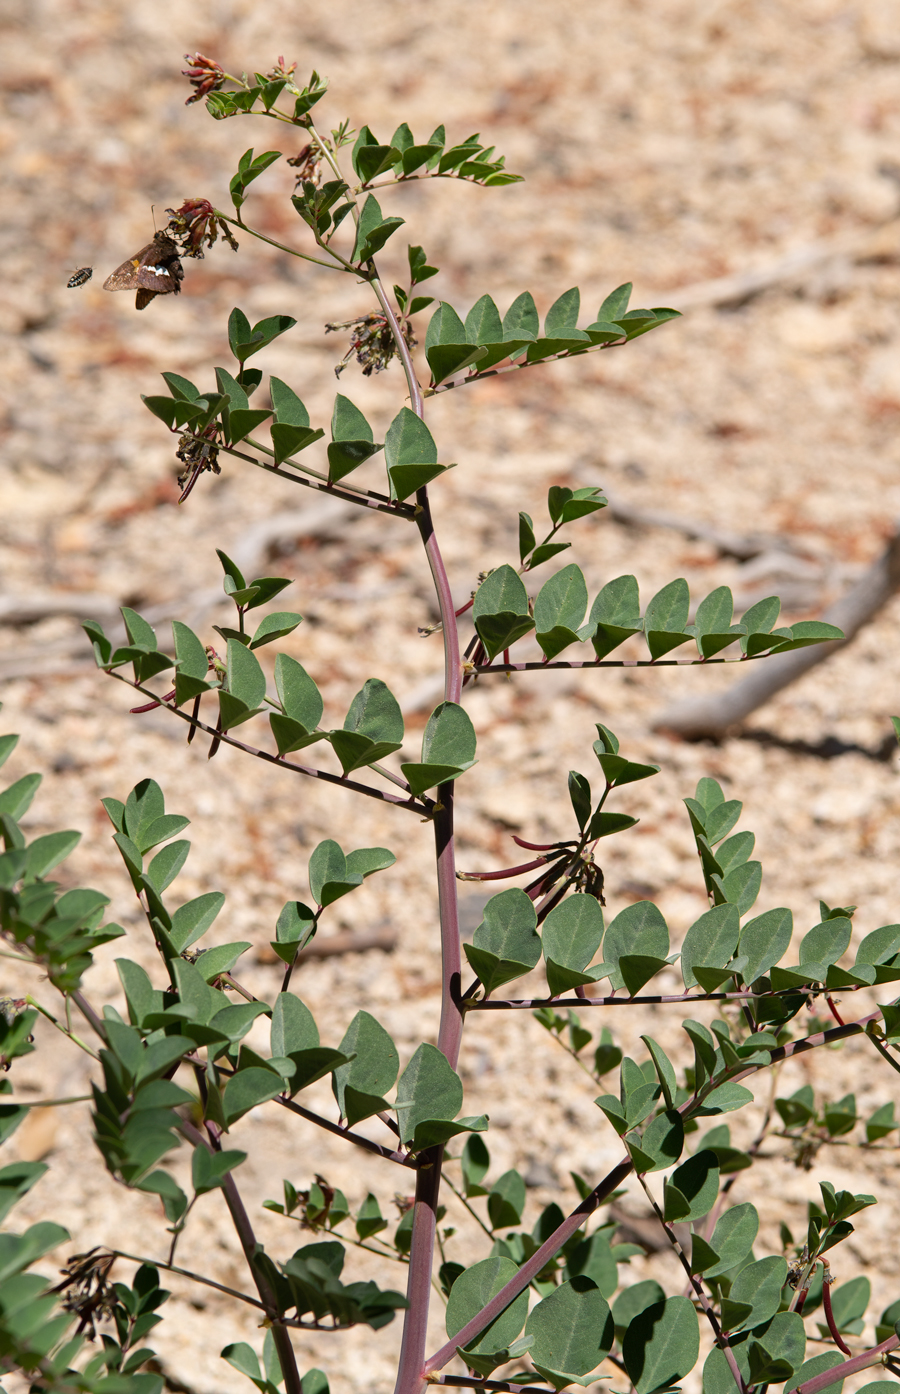 Hosackia crassifolia, a larval food plant of the northern cloudywing